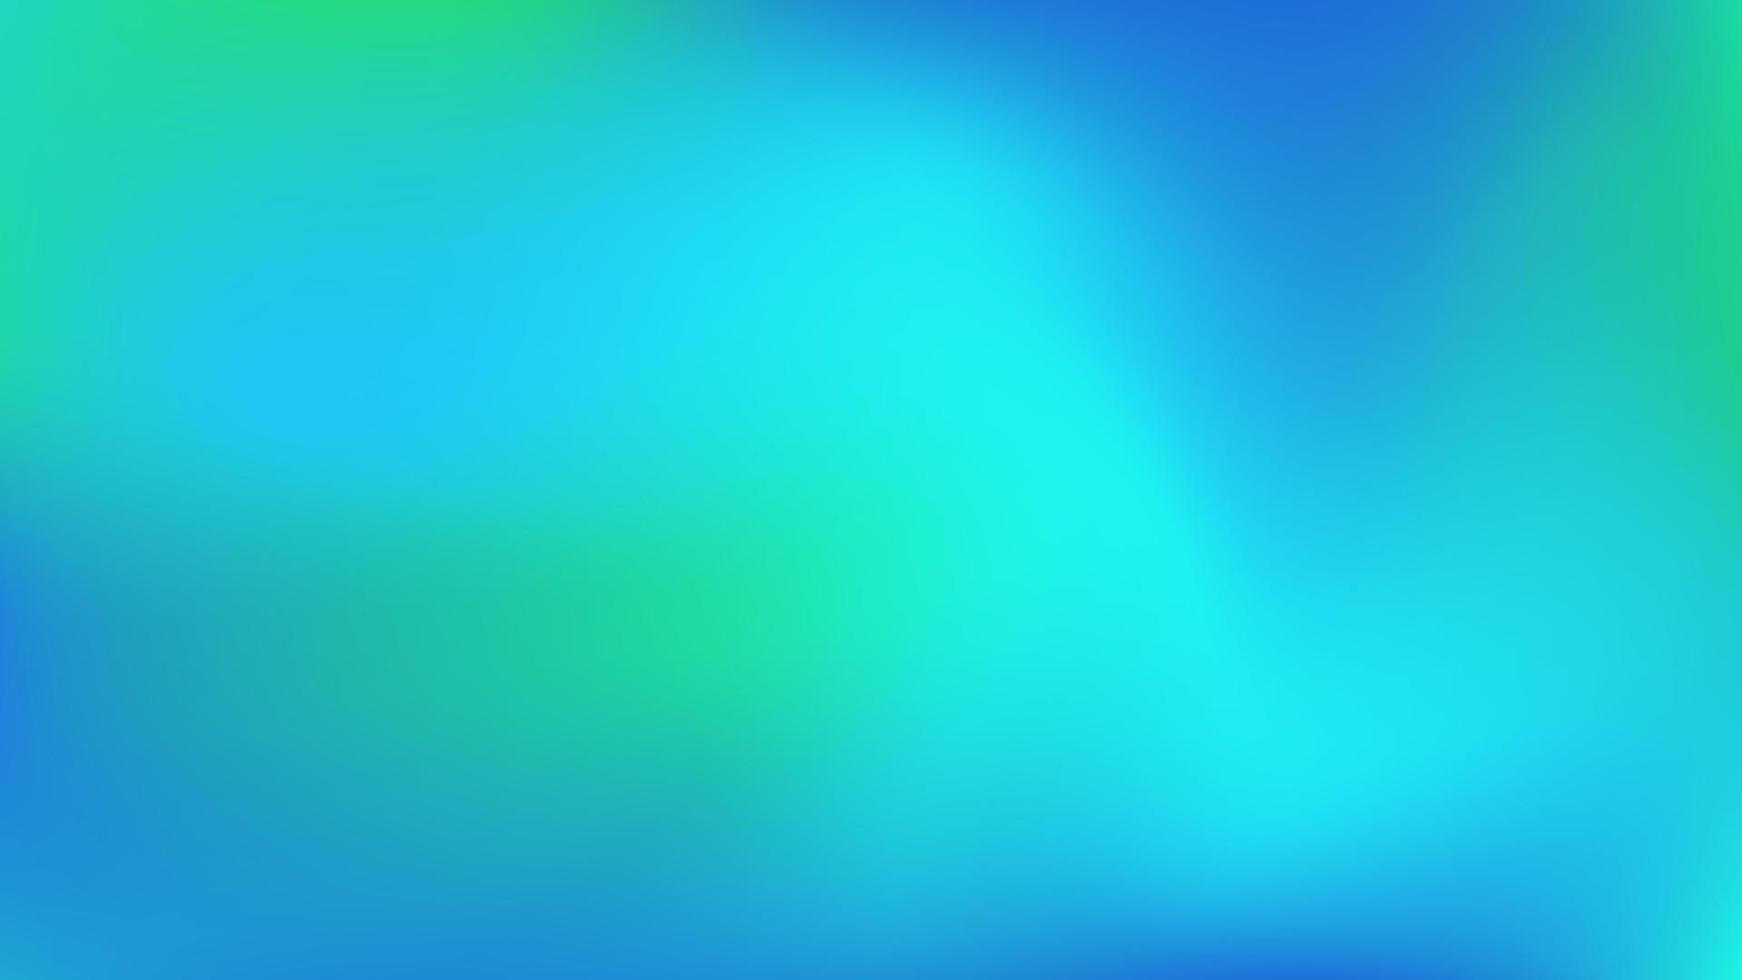 abstract gradient background with green and blue colors. gradient background for wallpaper, posters, flyers, banners, flyers and more